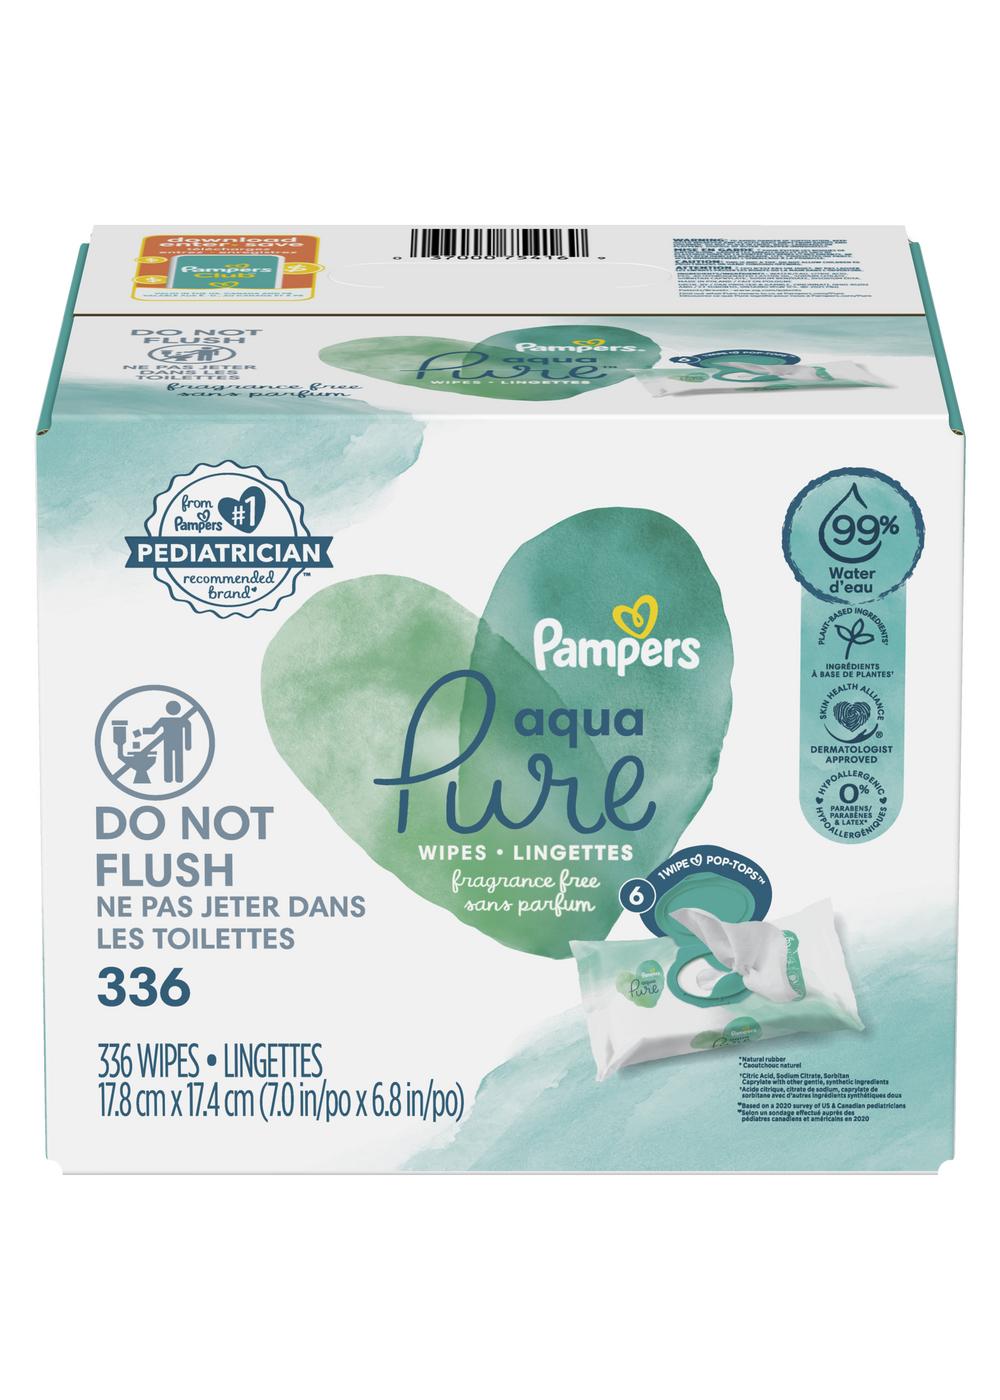 Pampers Aqua Pure Baby Wipes 6 Pk; image 1 of 7